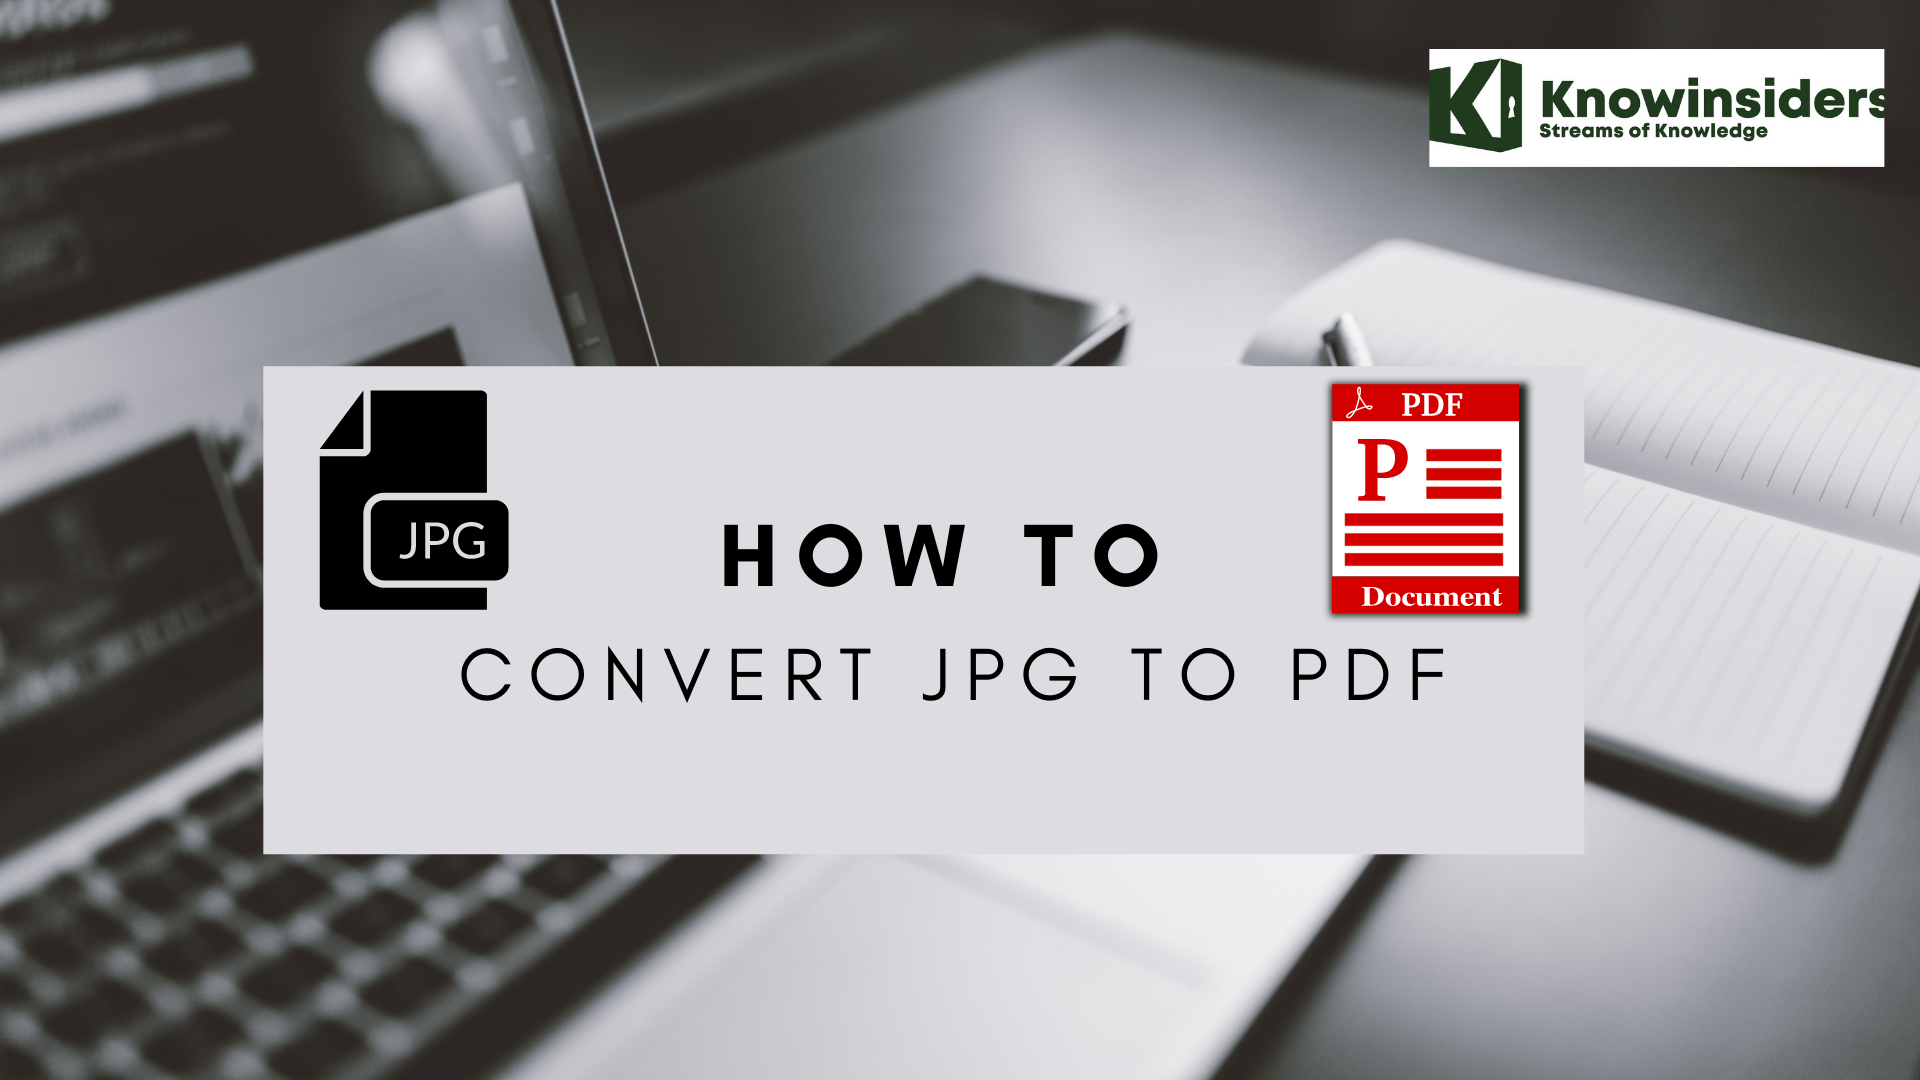 How to Convert JPG to PDF: Step-By-Step Guide